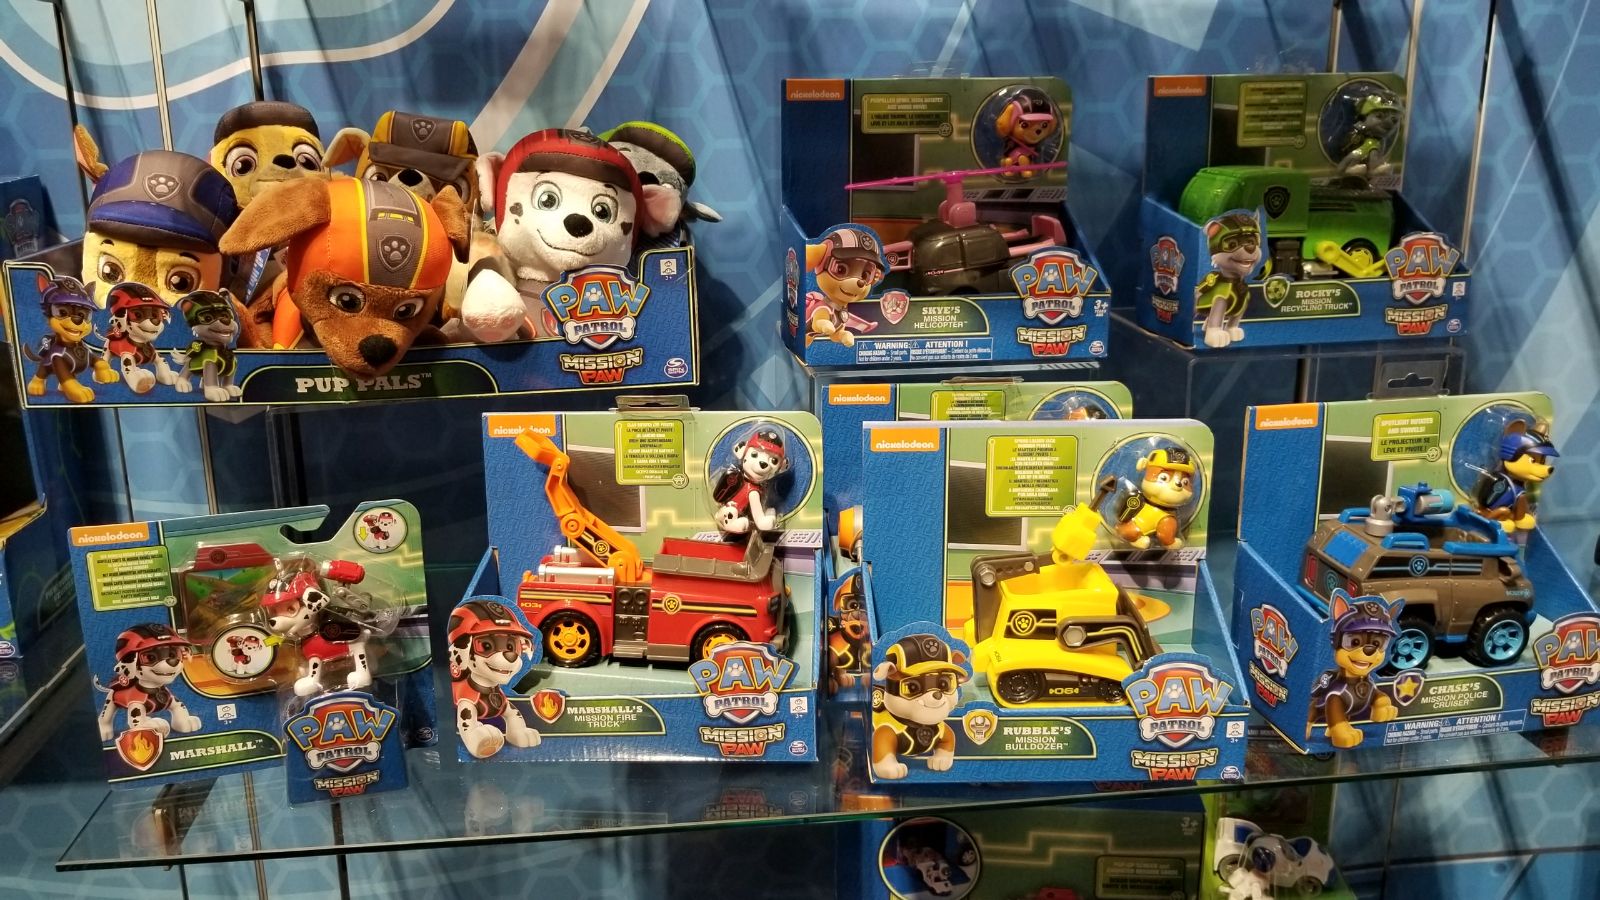 Toys"R"Us on X: "The #PAWPatrol Pups are ready for any job, mission or rescue when equipped with these vehicles from @SpinMaster! #TFNY https://t.co/kzxr32dLGV" /